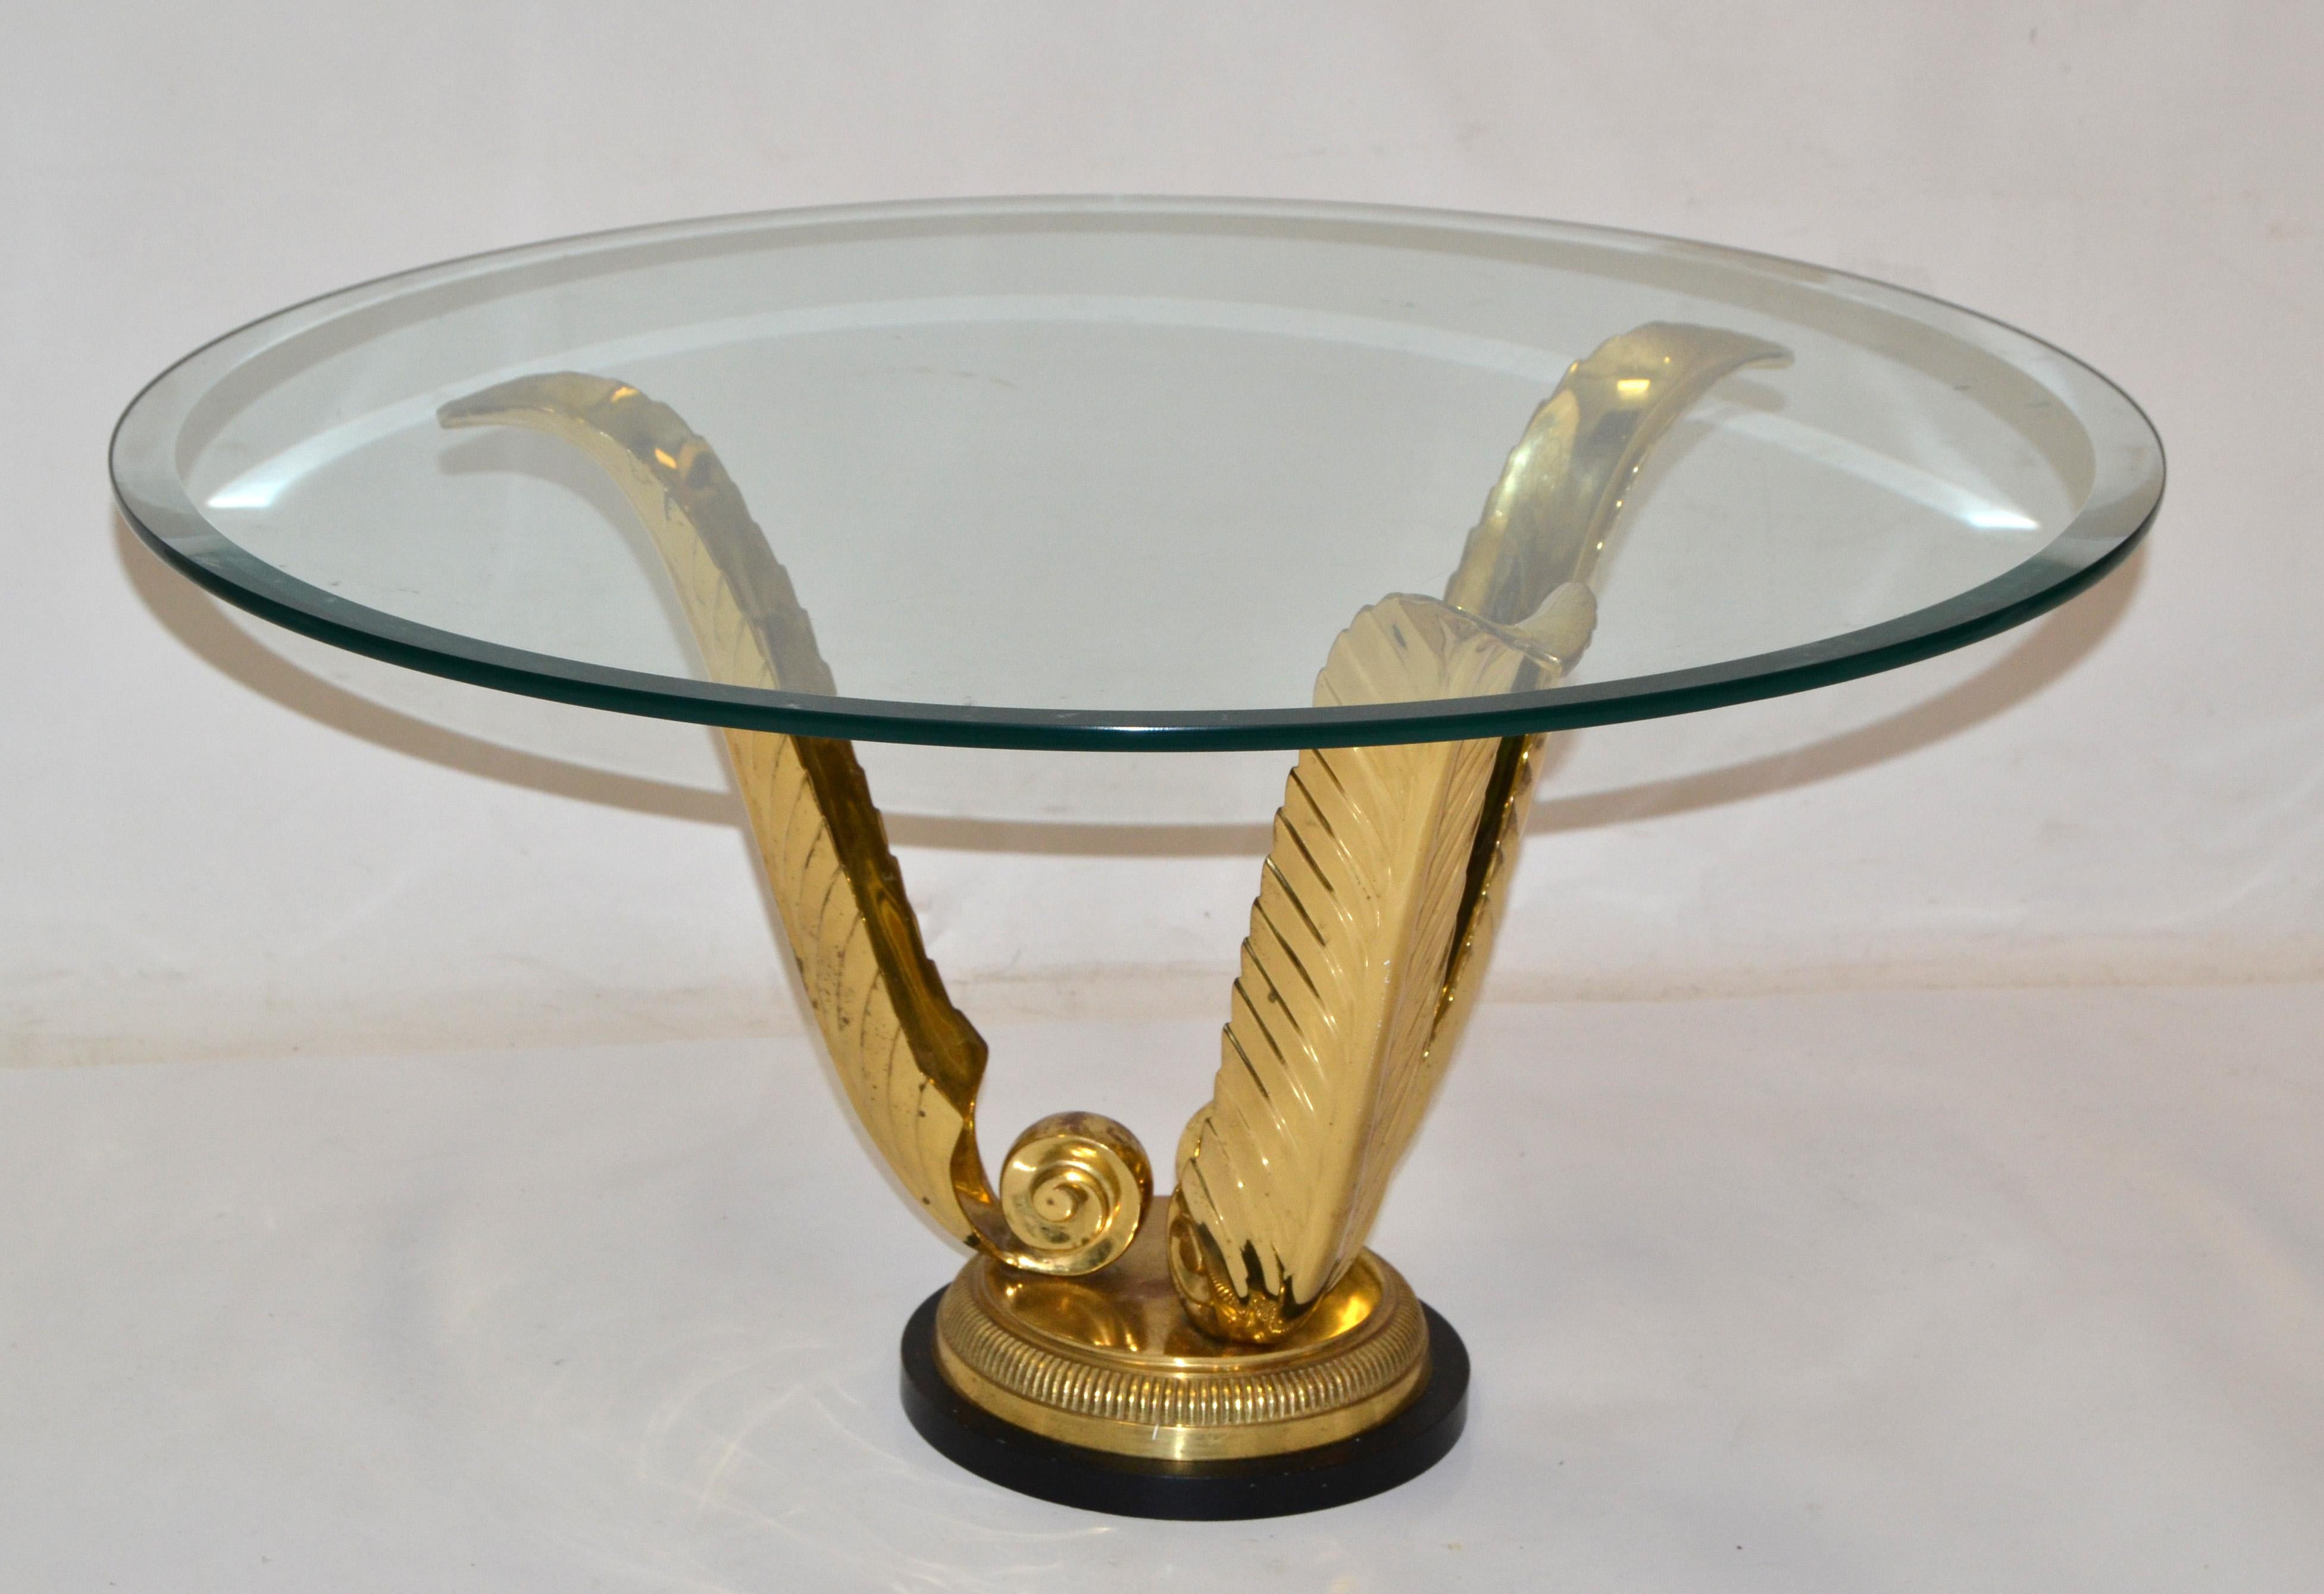 Bronze & Steel Agave Coffee Table Base or Figurative Sculpture Italian Regency In Good Condition For Sale In Miami, FL